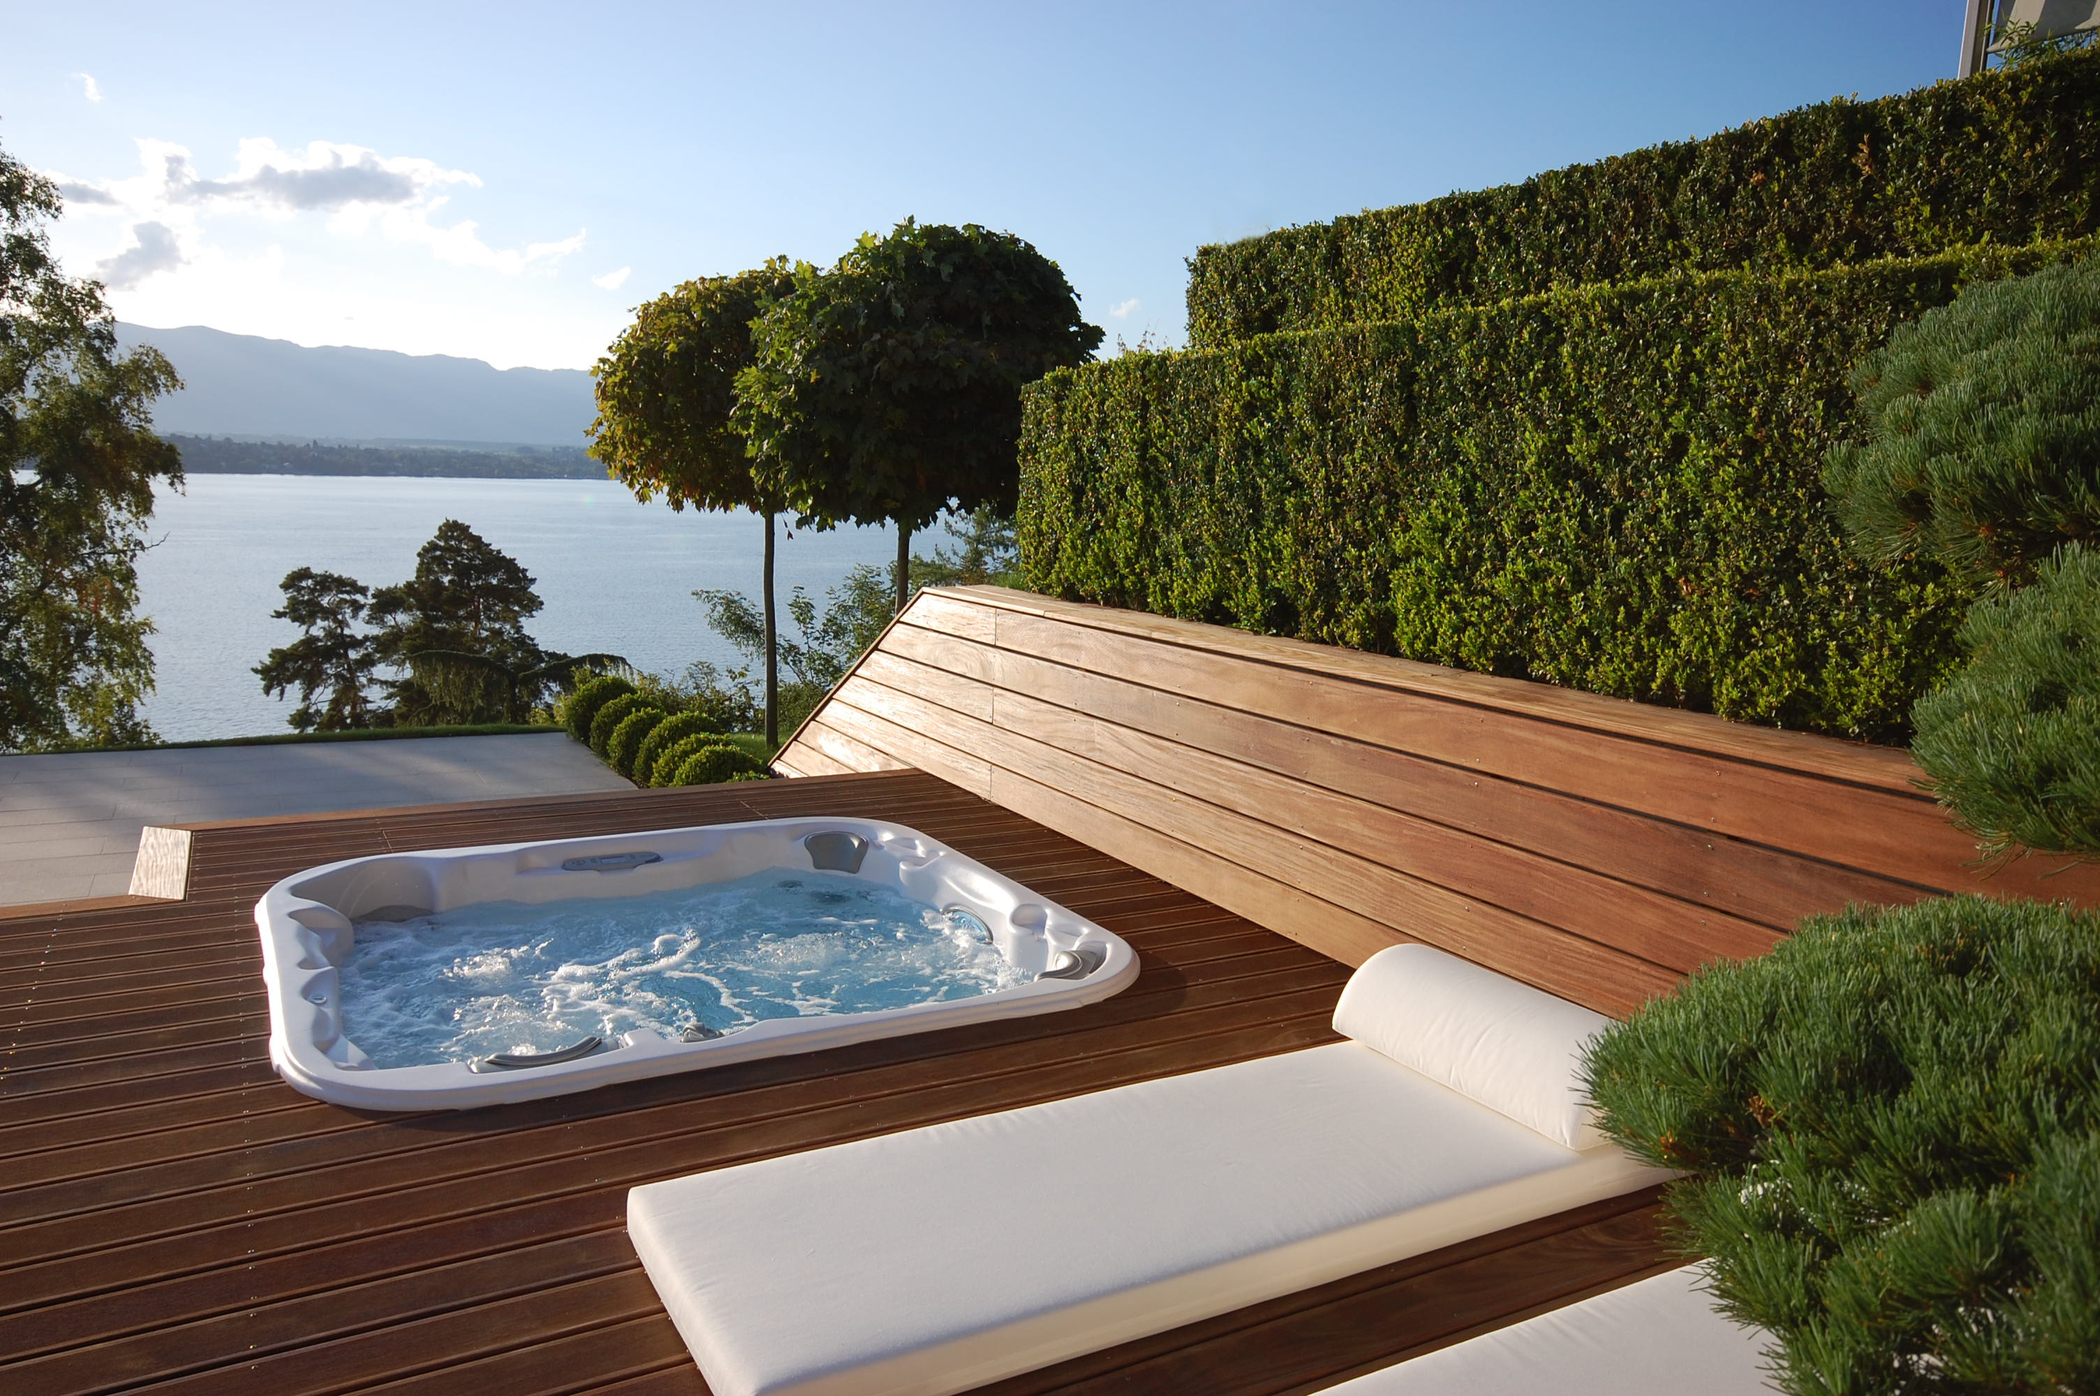 Outdoor hot tub installation on a patio in the spring.